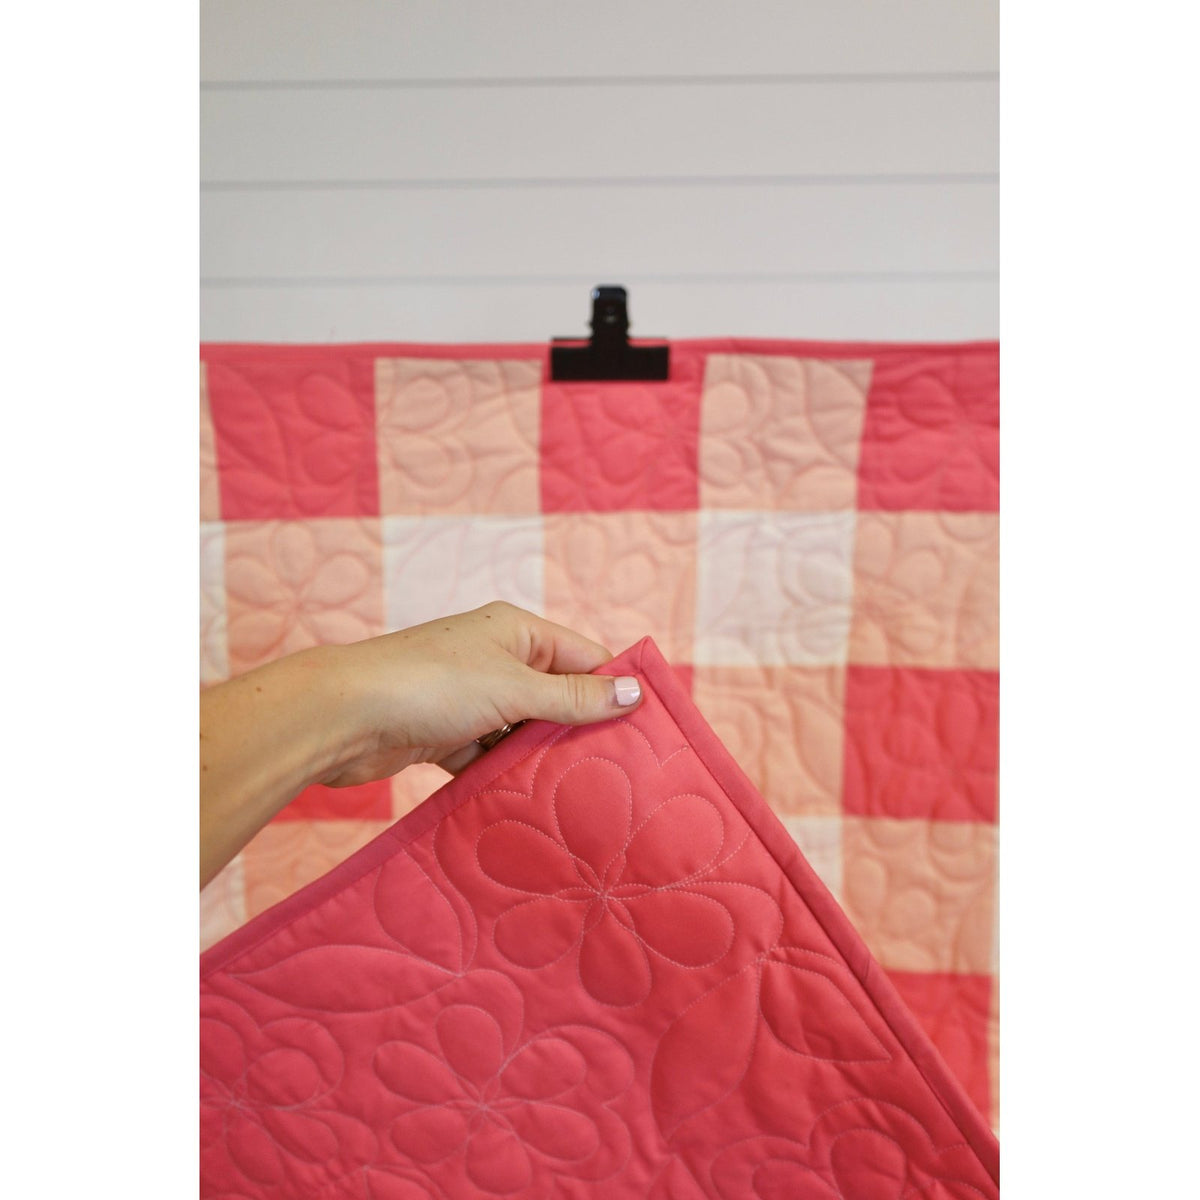 Coral Meadow Easy Quilt Kit: Pre-Cut Fabric, Pattern, Binding & Backing - Girl-Friendly Beginner's Sewing Project, 41" x 49